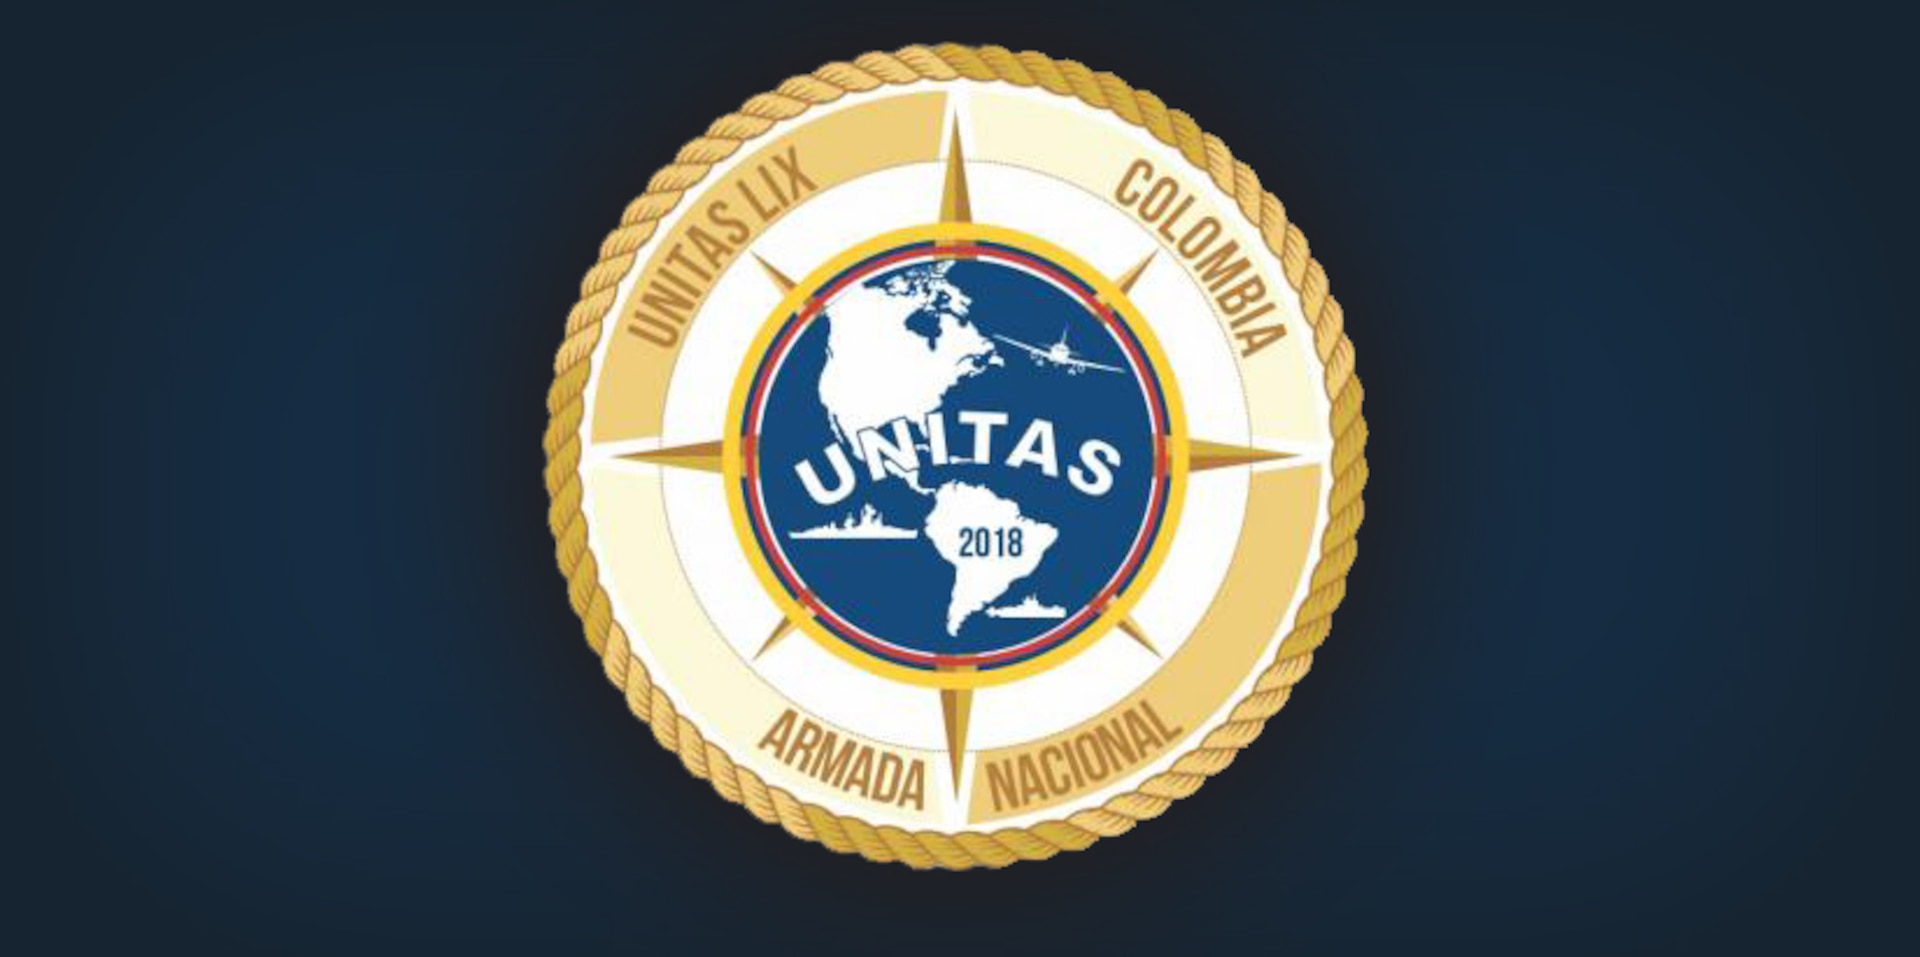 Colombia Takes the Lead in UNITAS LIX, Hosts Multinational Exercise > U